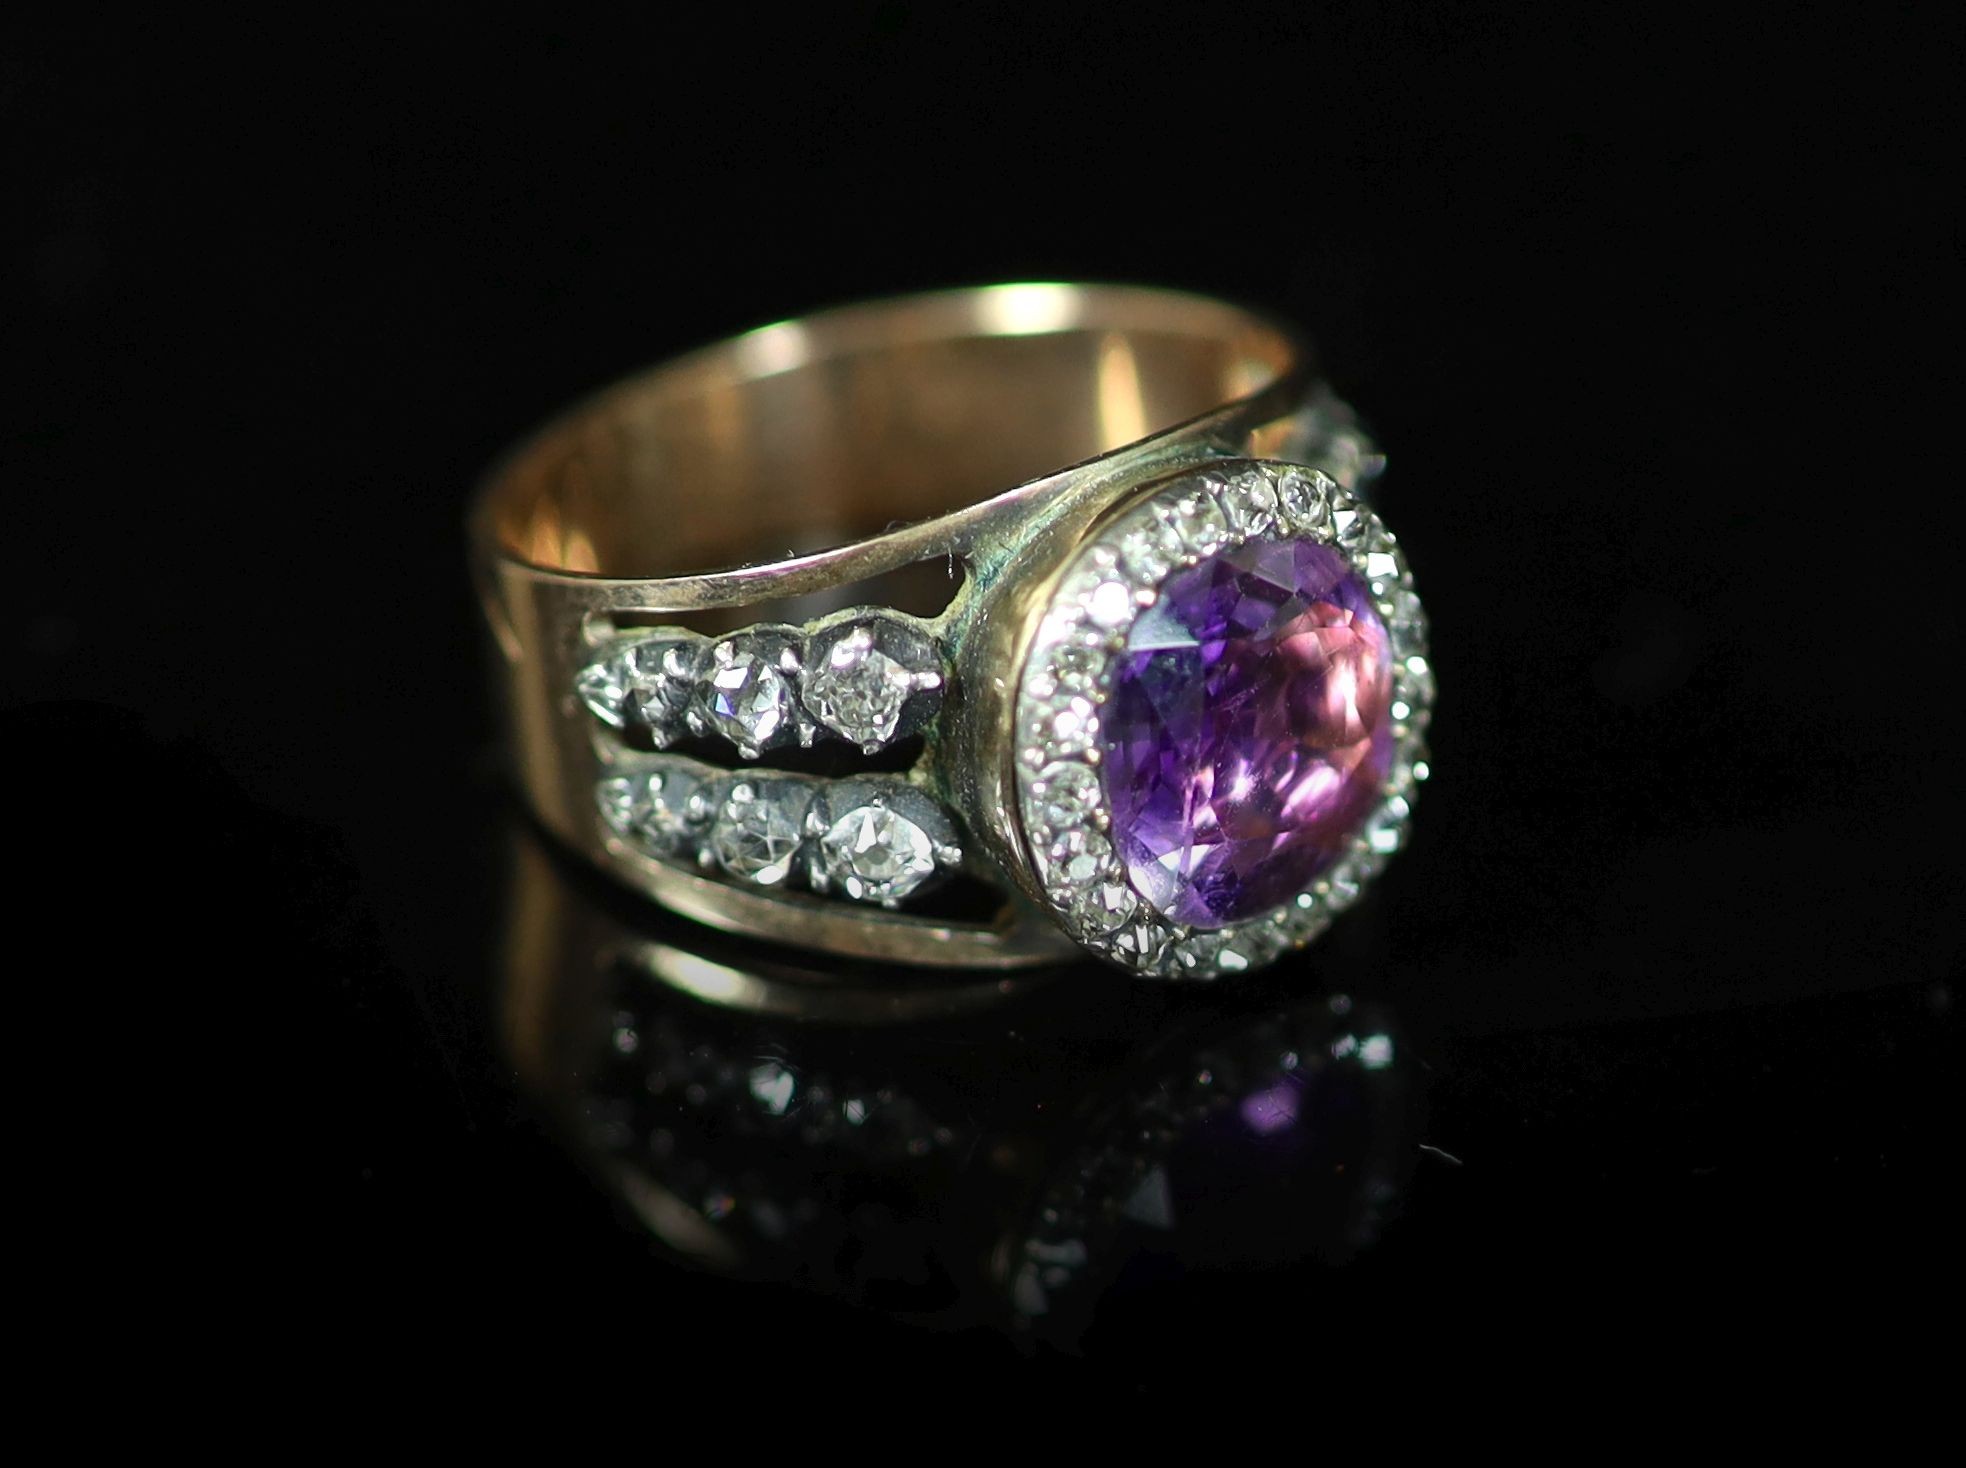 An antique gold, diamond and amethyst cluster ring